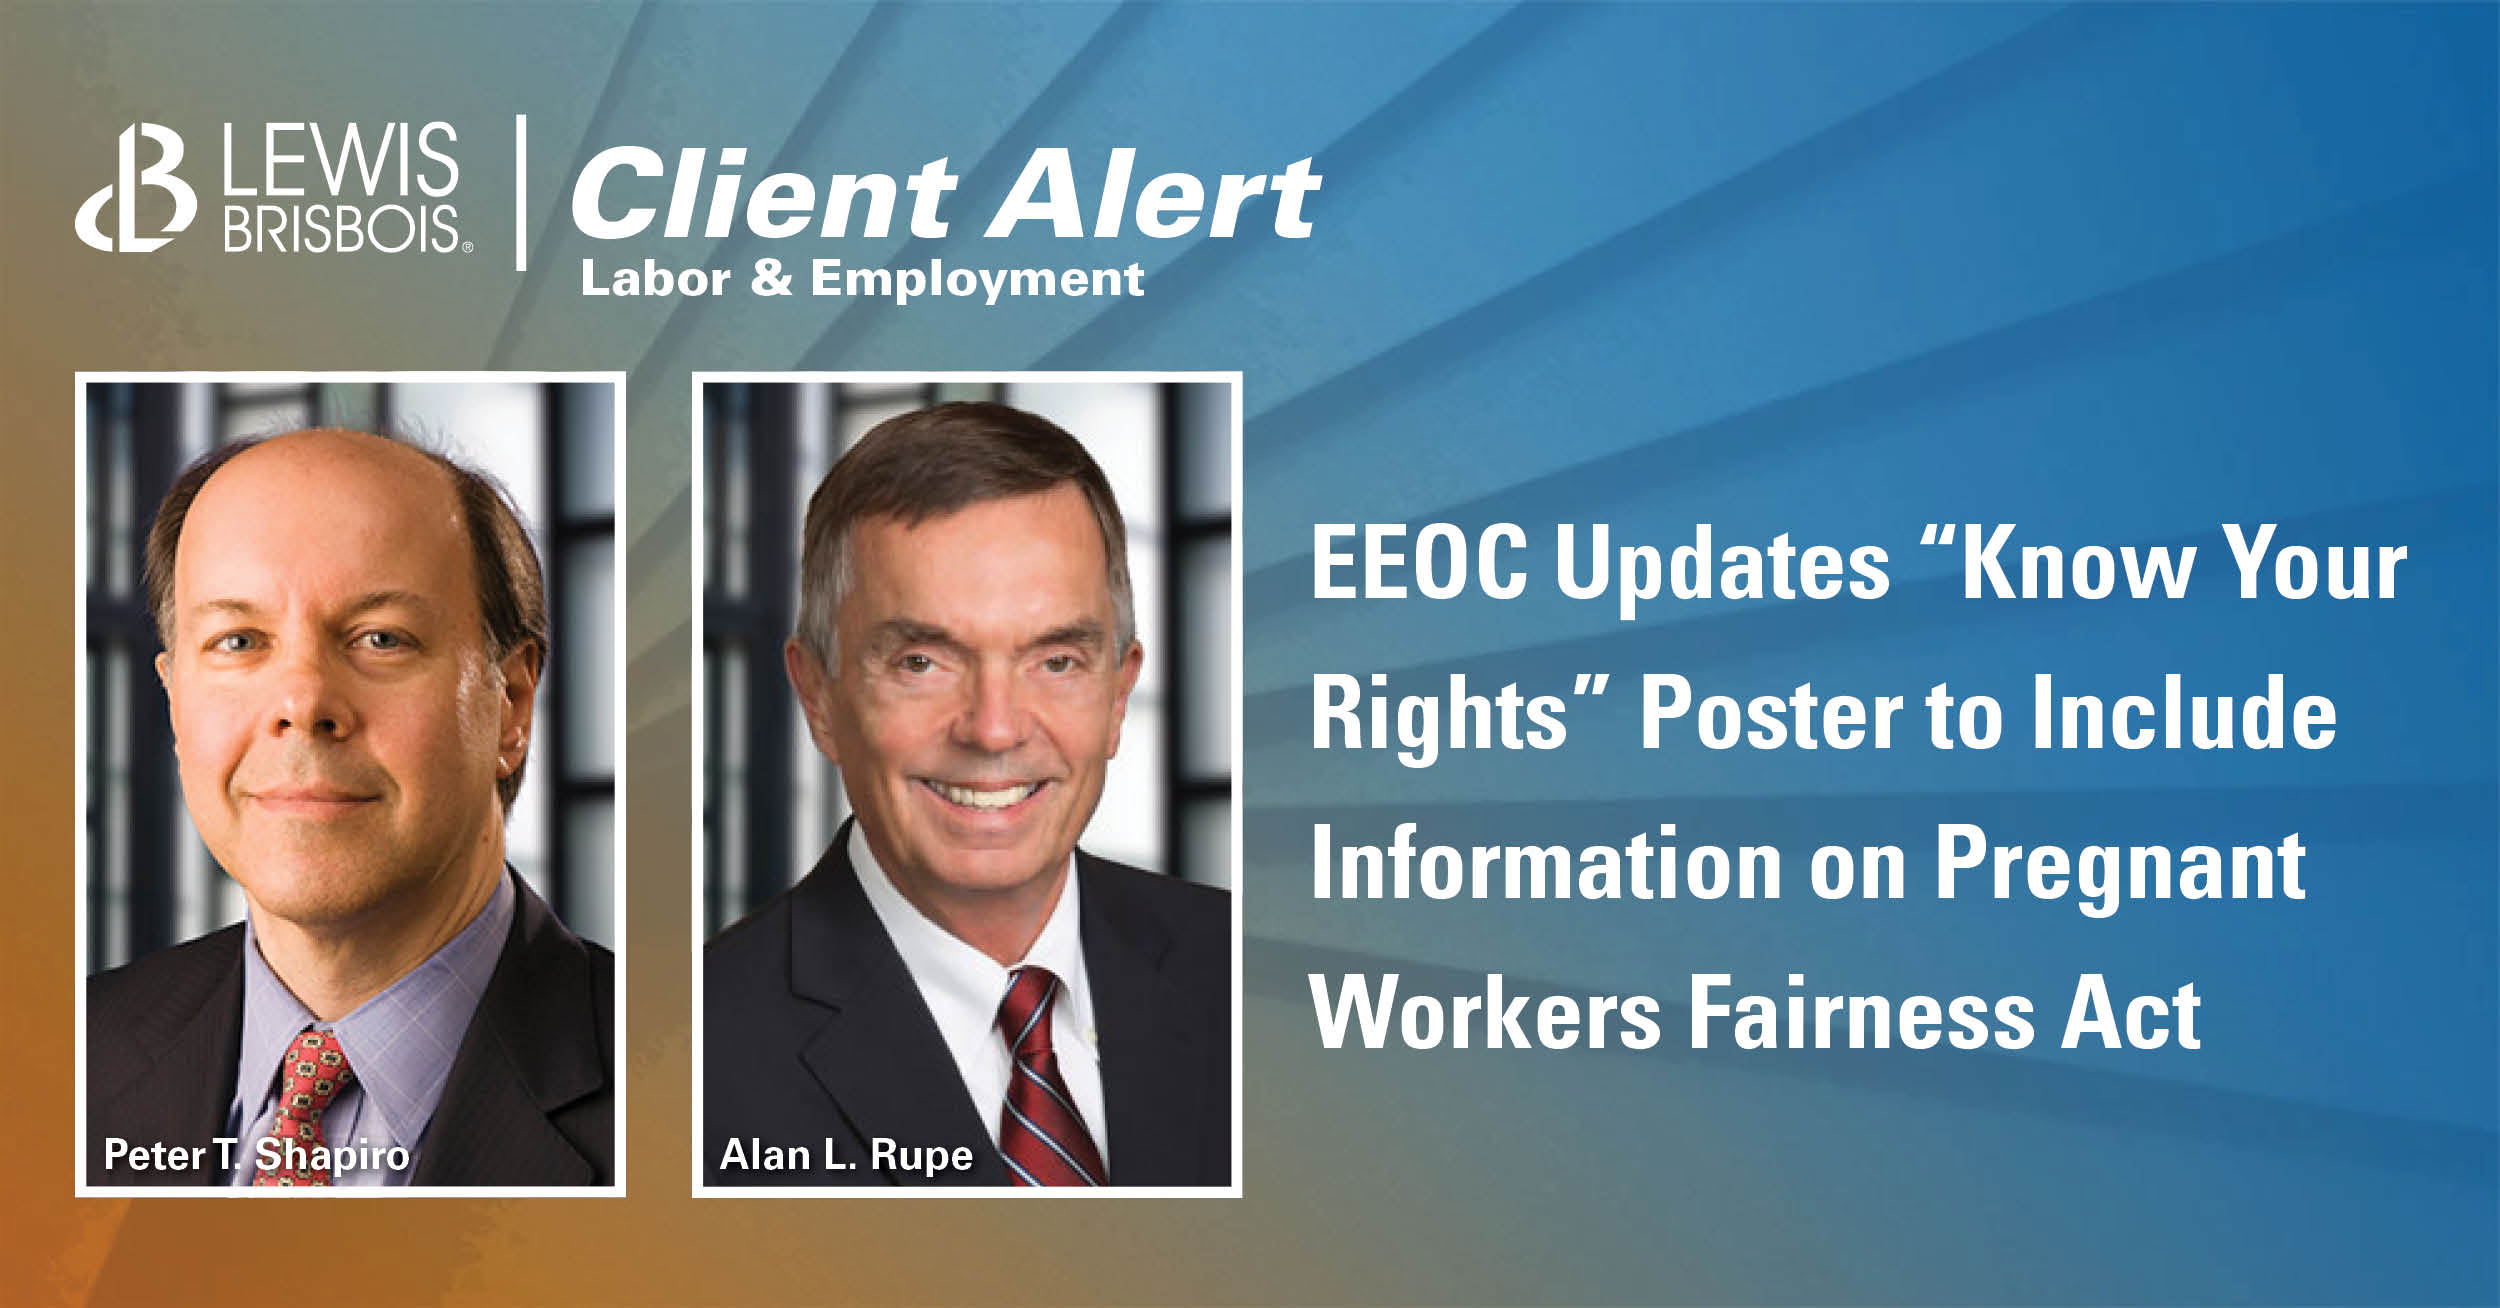 EEOC Updates “Know Your Rights” Poster to Include Information on